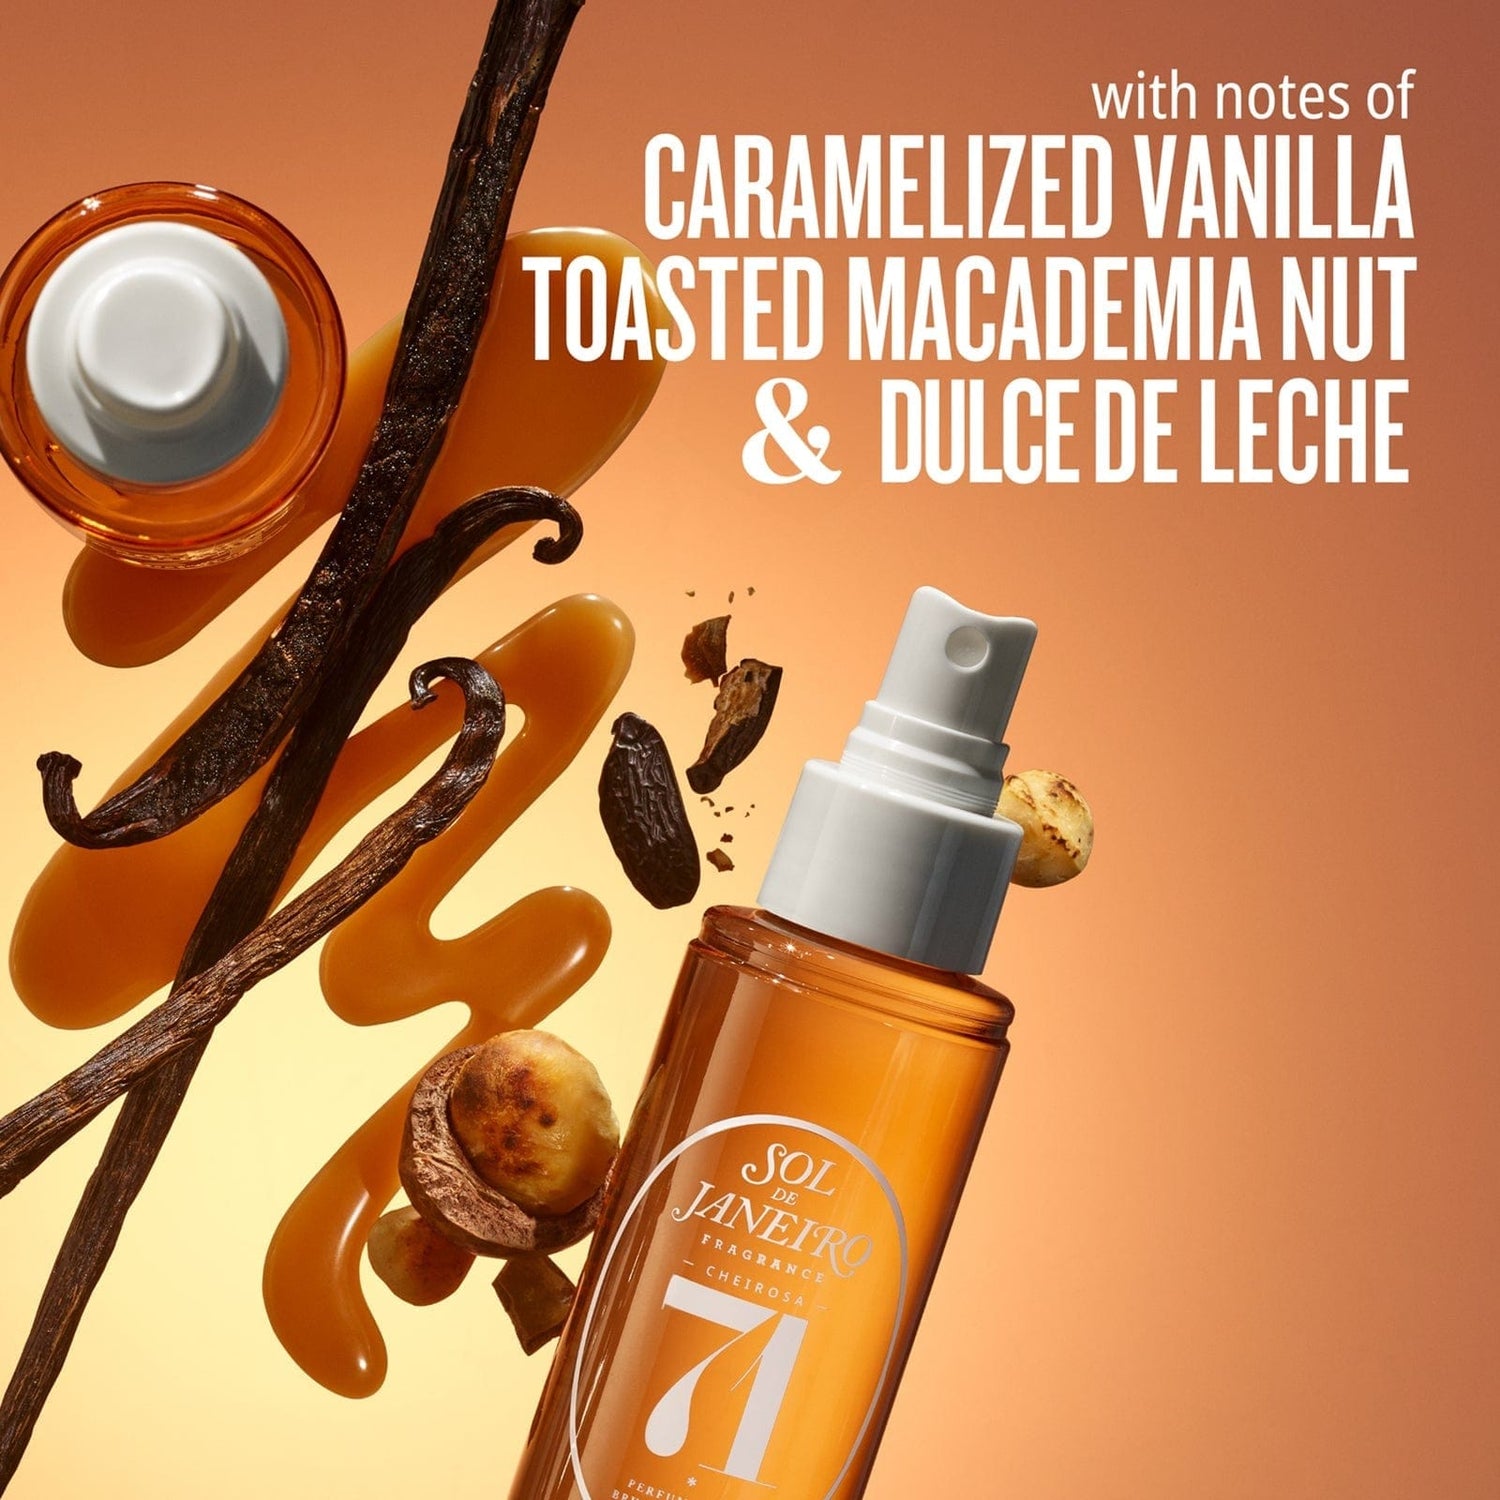 With notes of caramelized vanilla, toasted macadamia nut and dulce de leche